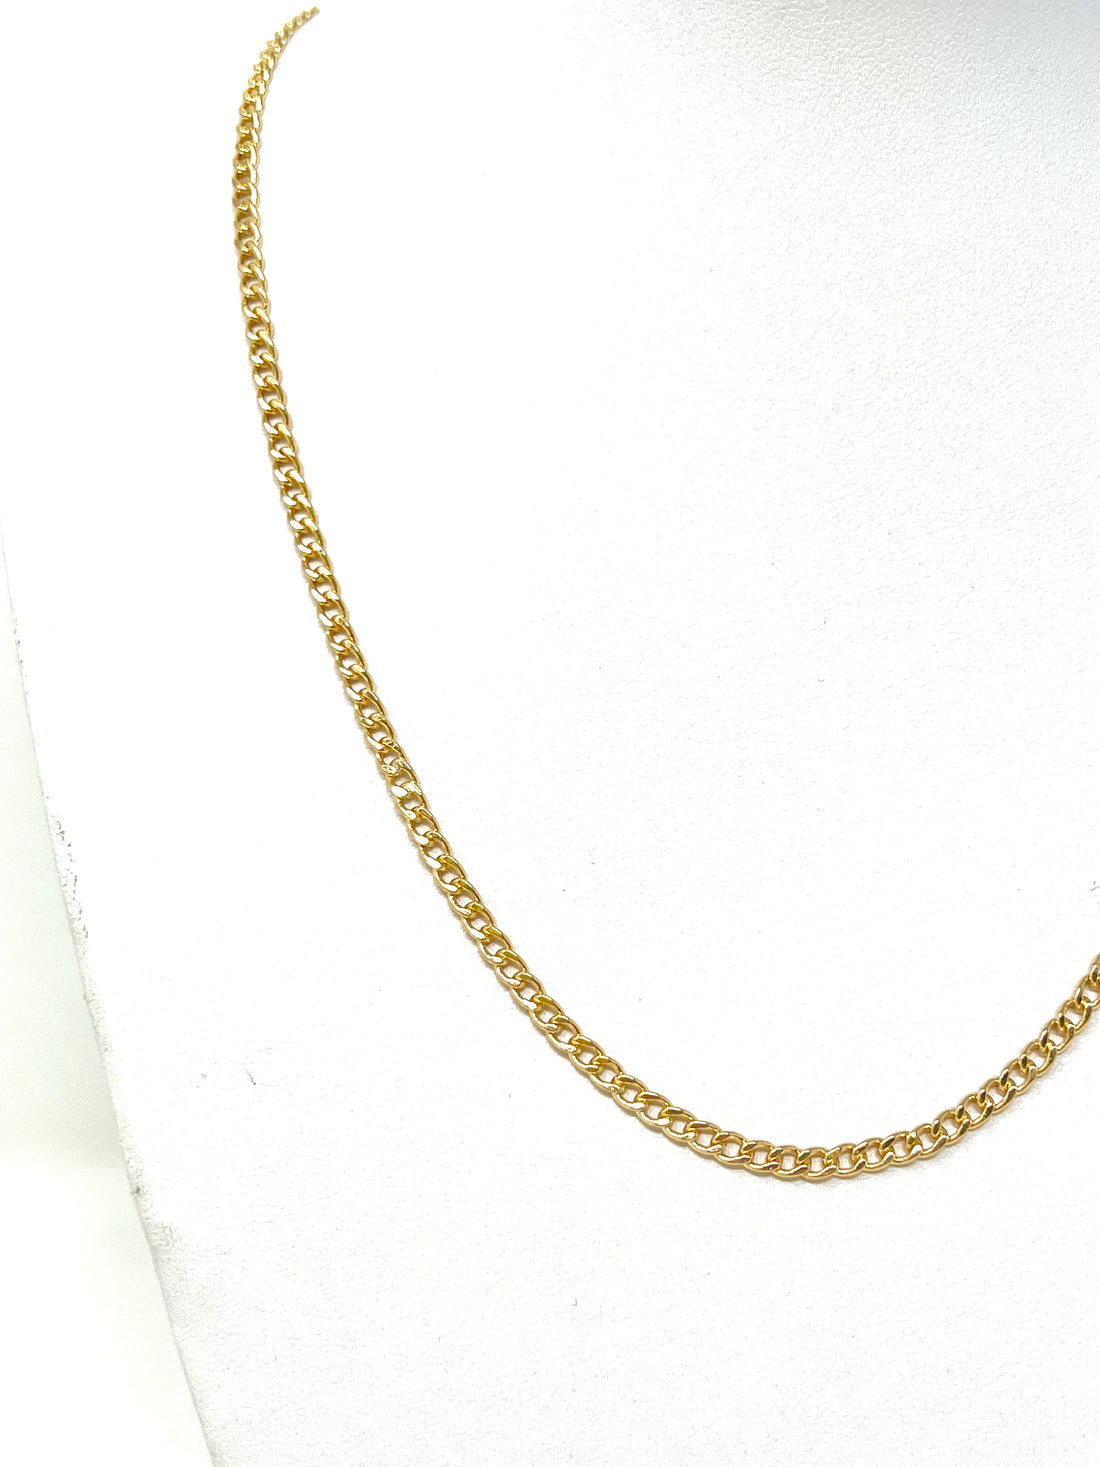 Patrick Gold Chain Necklace